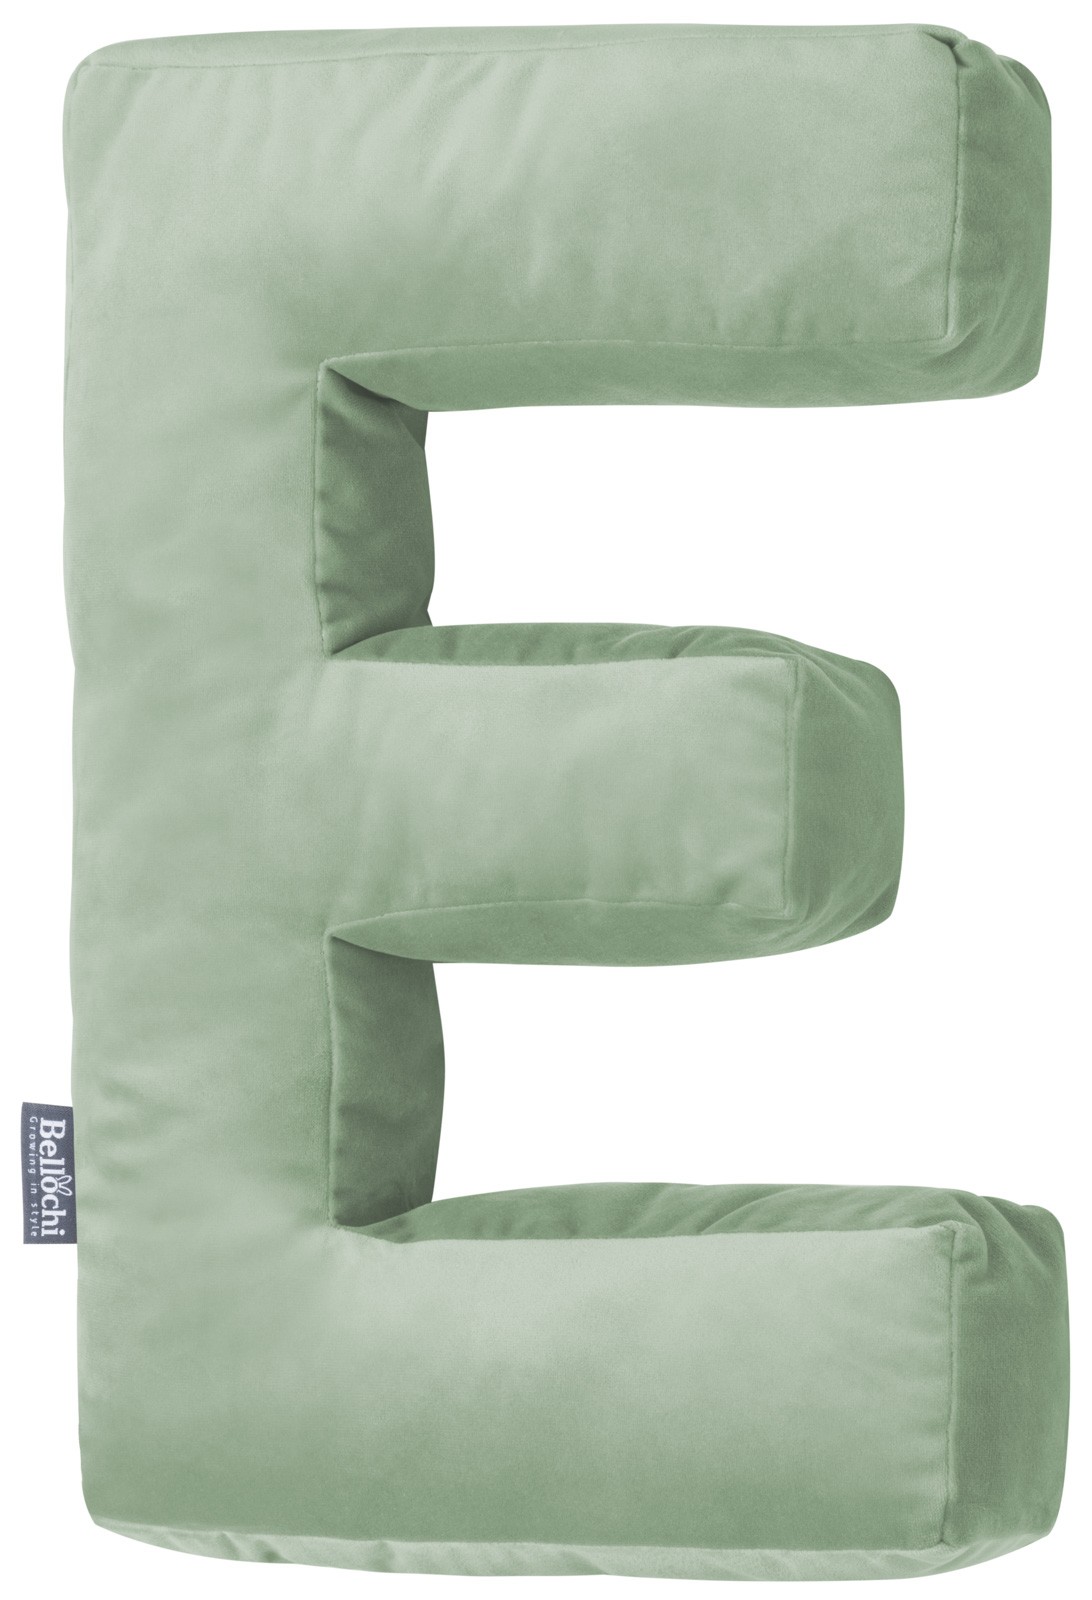 Decorative pillow in the shape of a letter ‘E’, olive